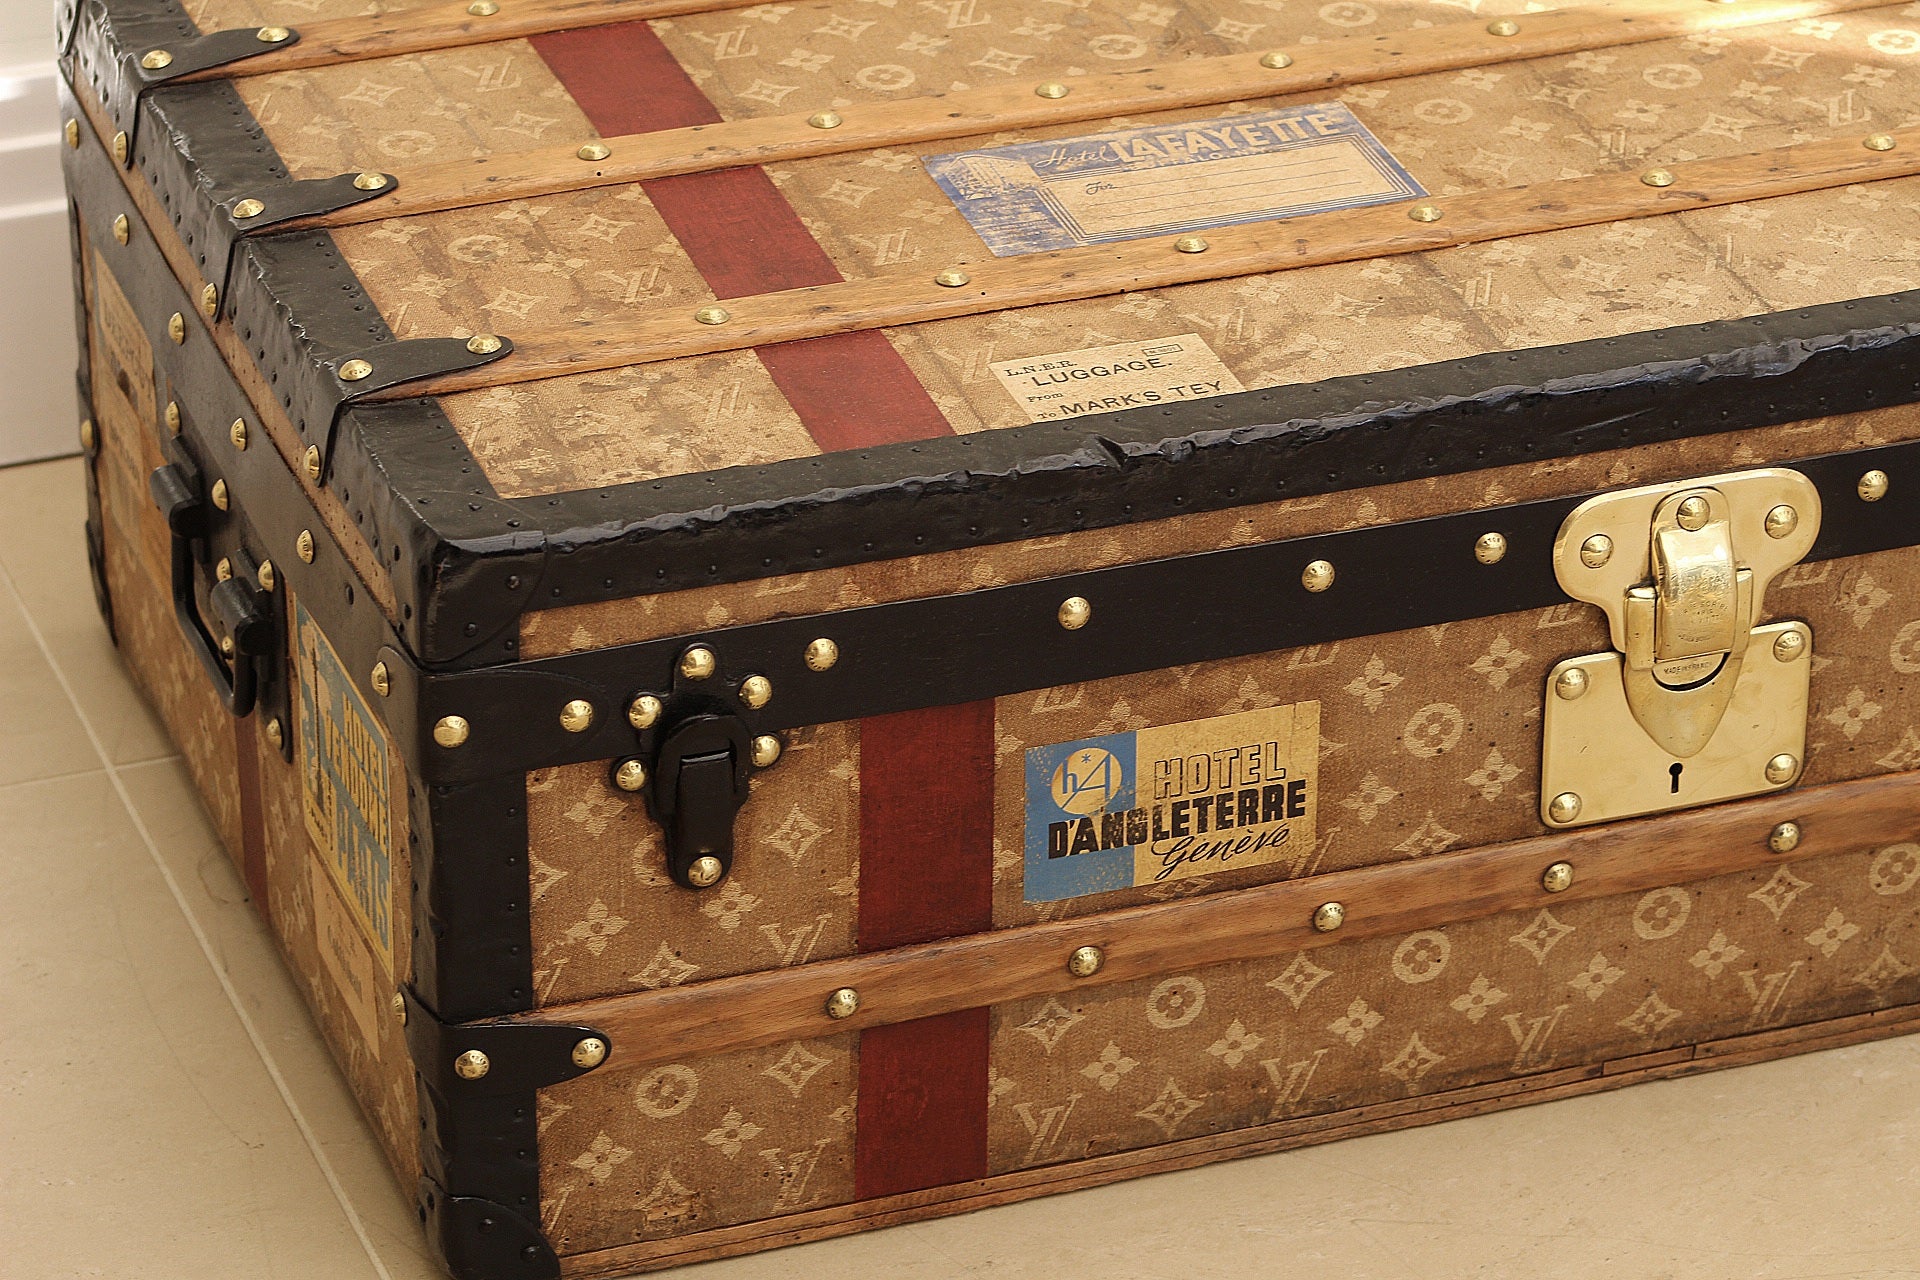 Louis Vuitton Classic Monogram Steamer Trunk, Early 1900's